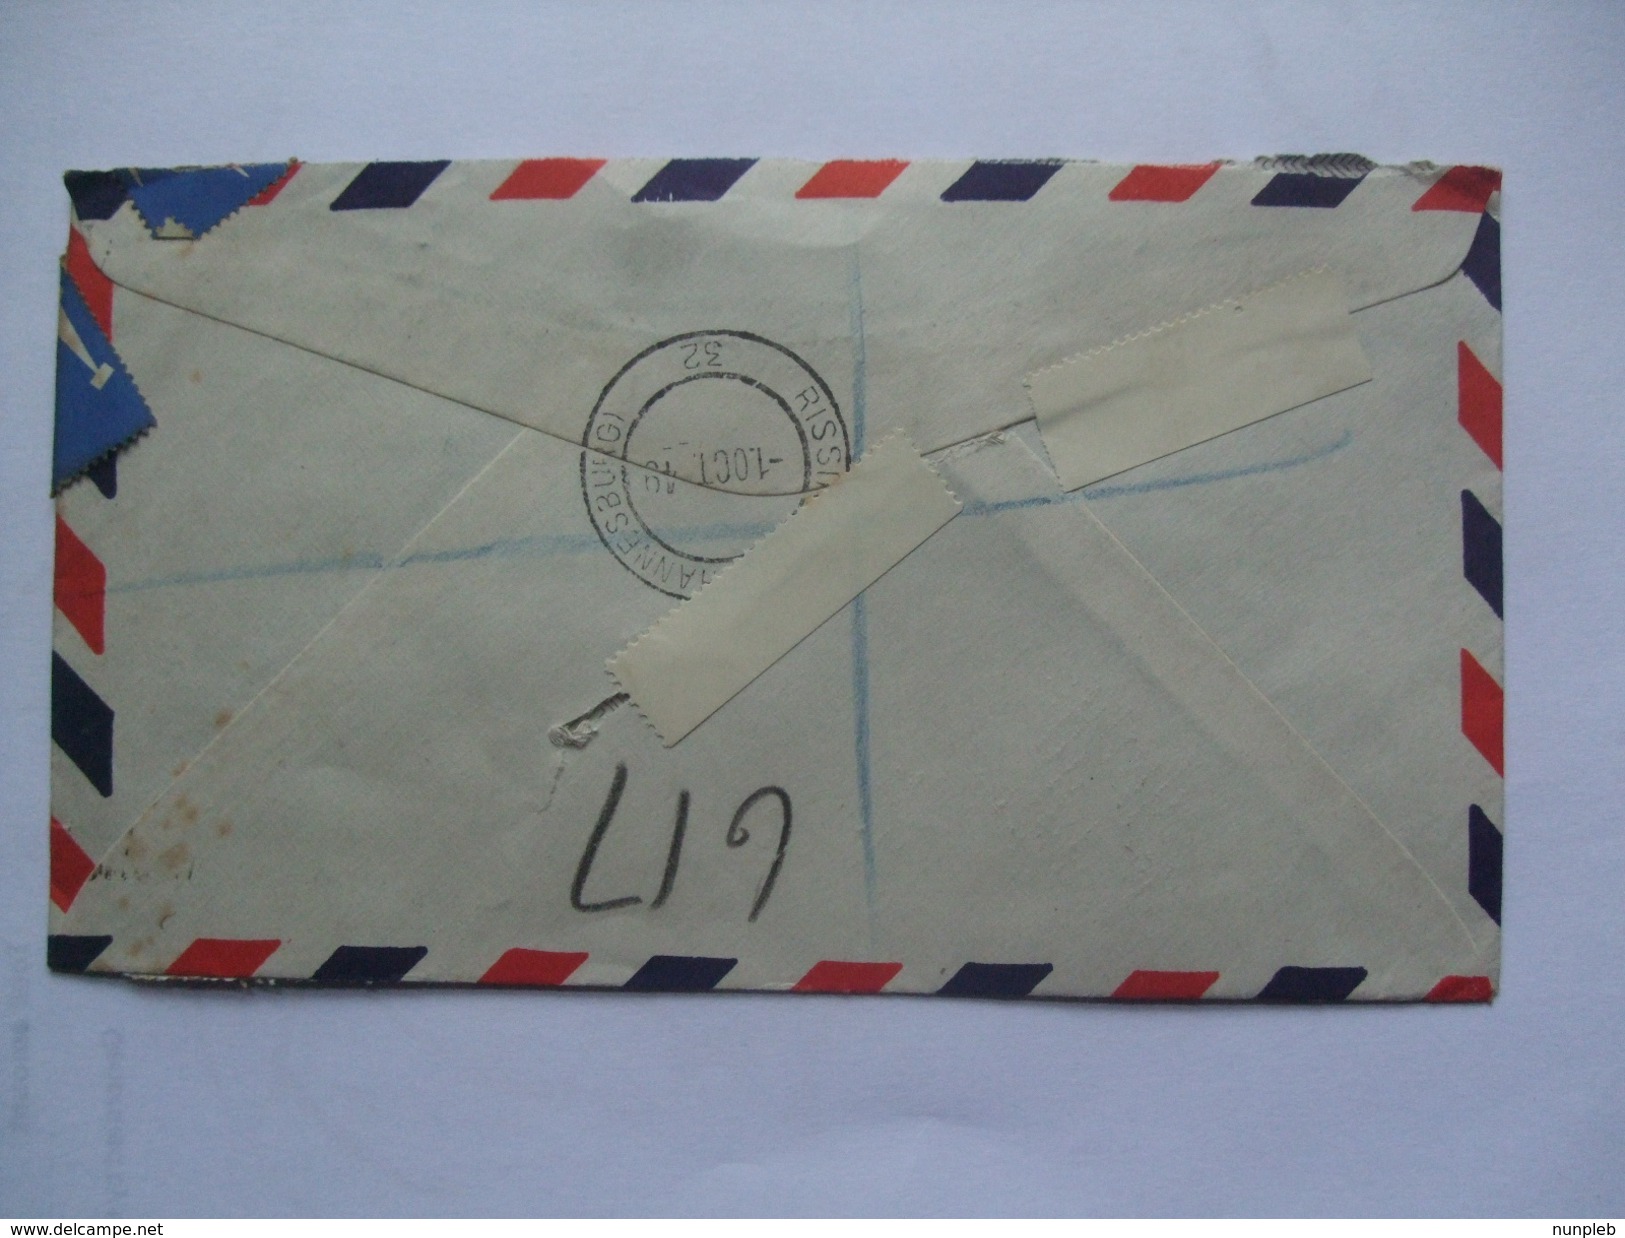 SOUTH AFRICA UPU 1949 REGISTERED JOHANNESBURG AIR MAIL FIRST DAY COVER TO LONDON - Covers & Documents